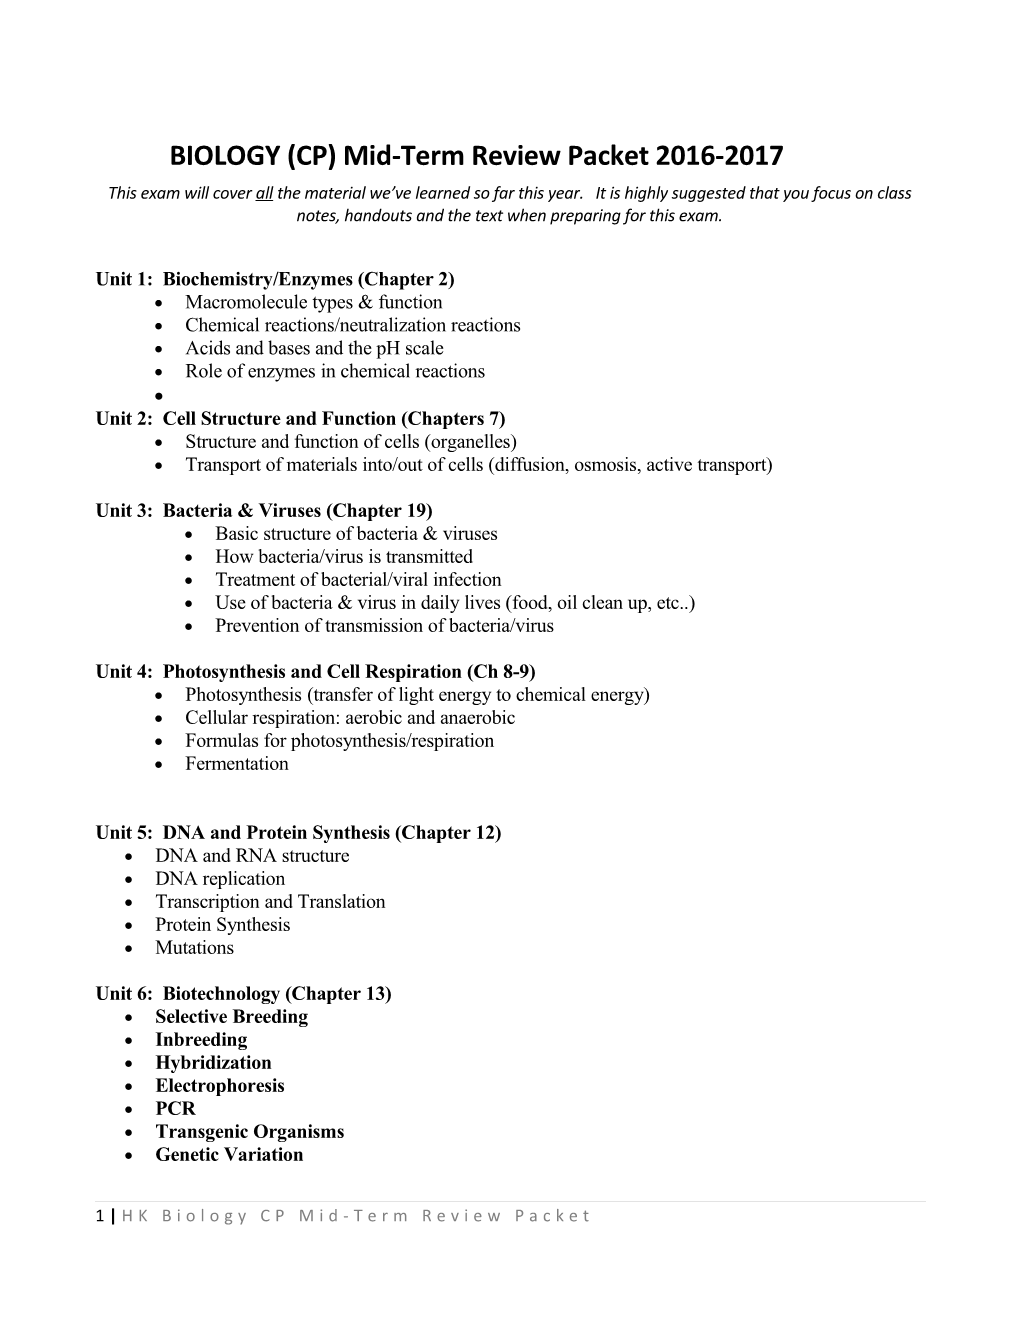 BIOLOGY (CP) Mid-Term Review Packet 2016-2017